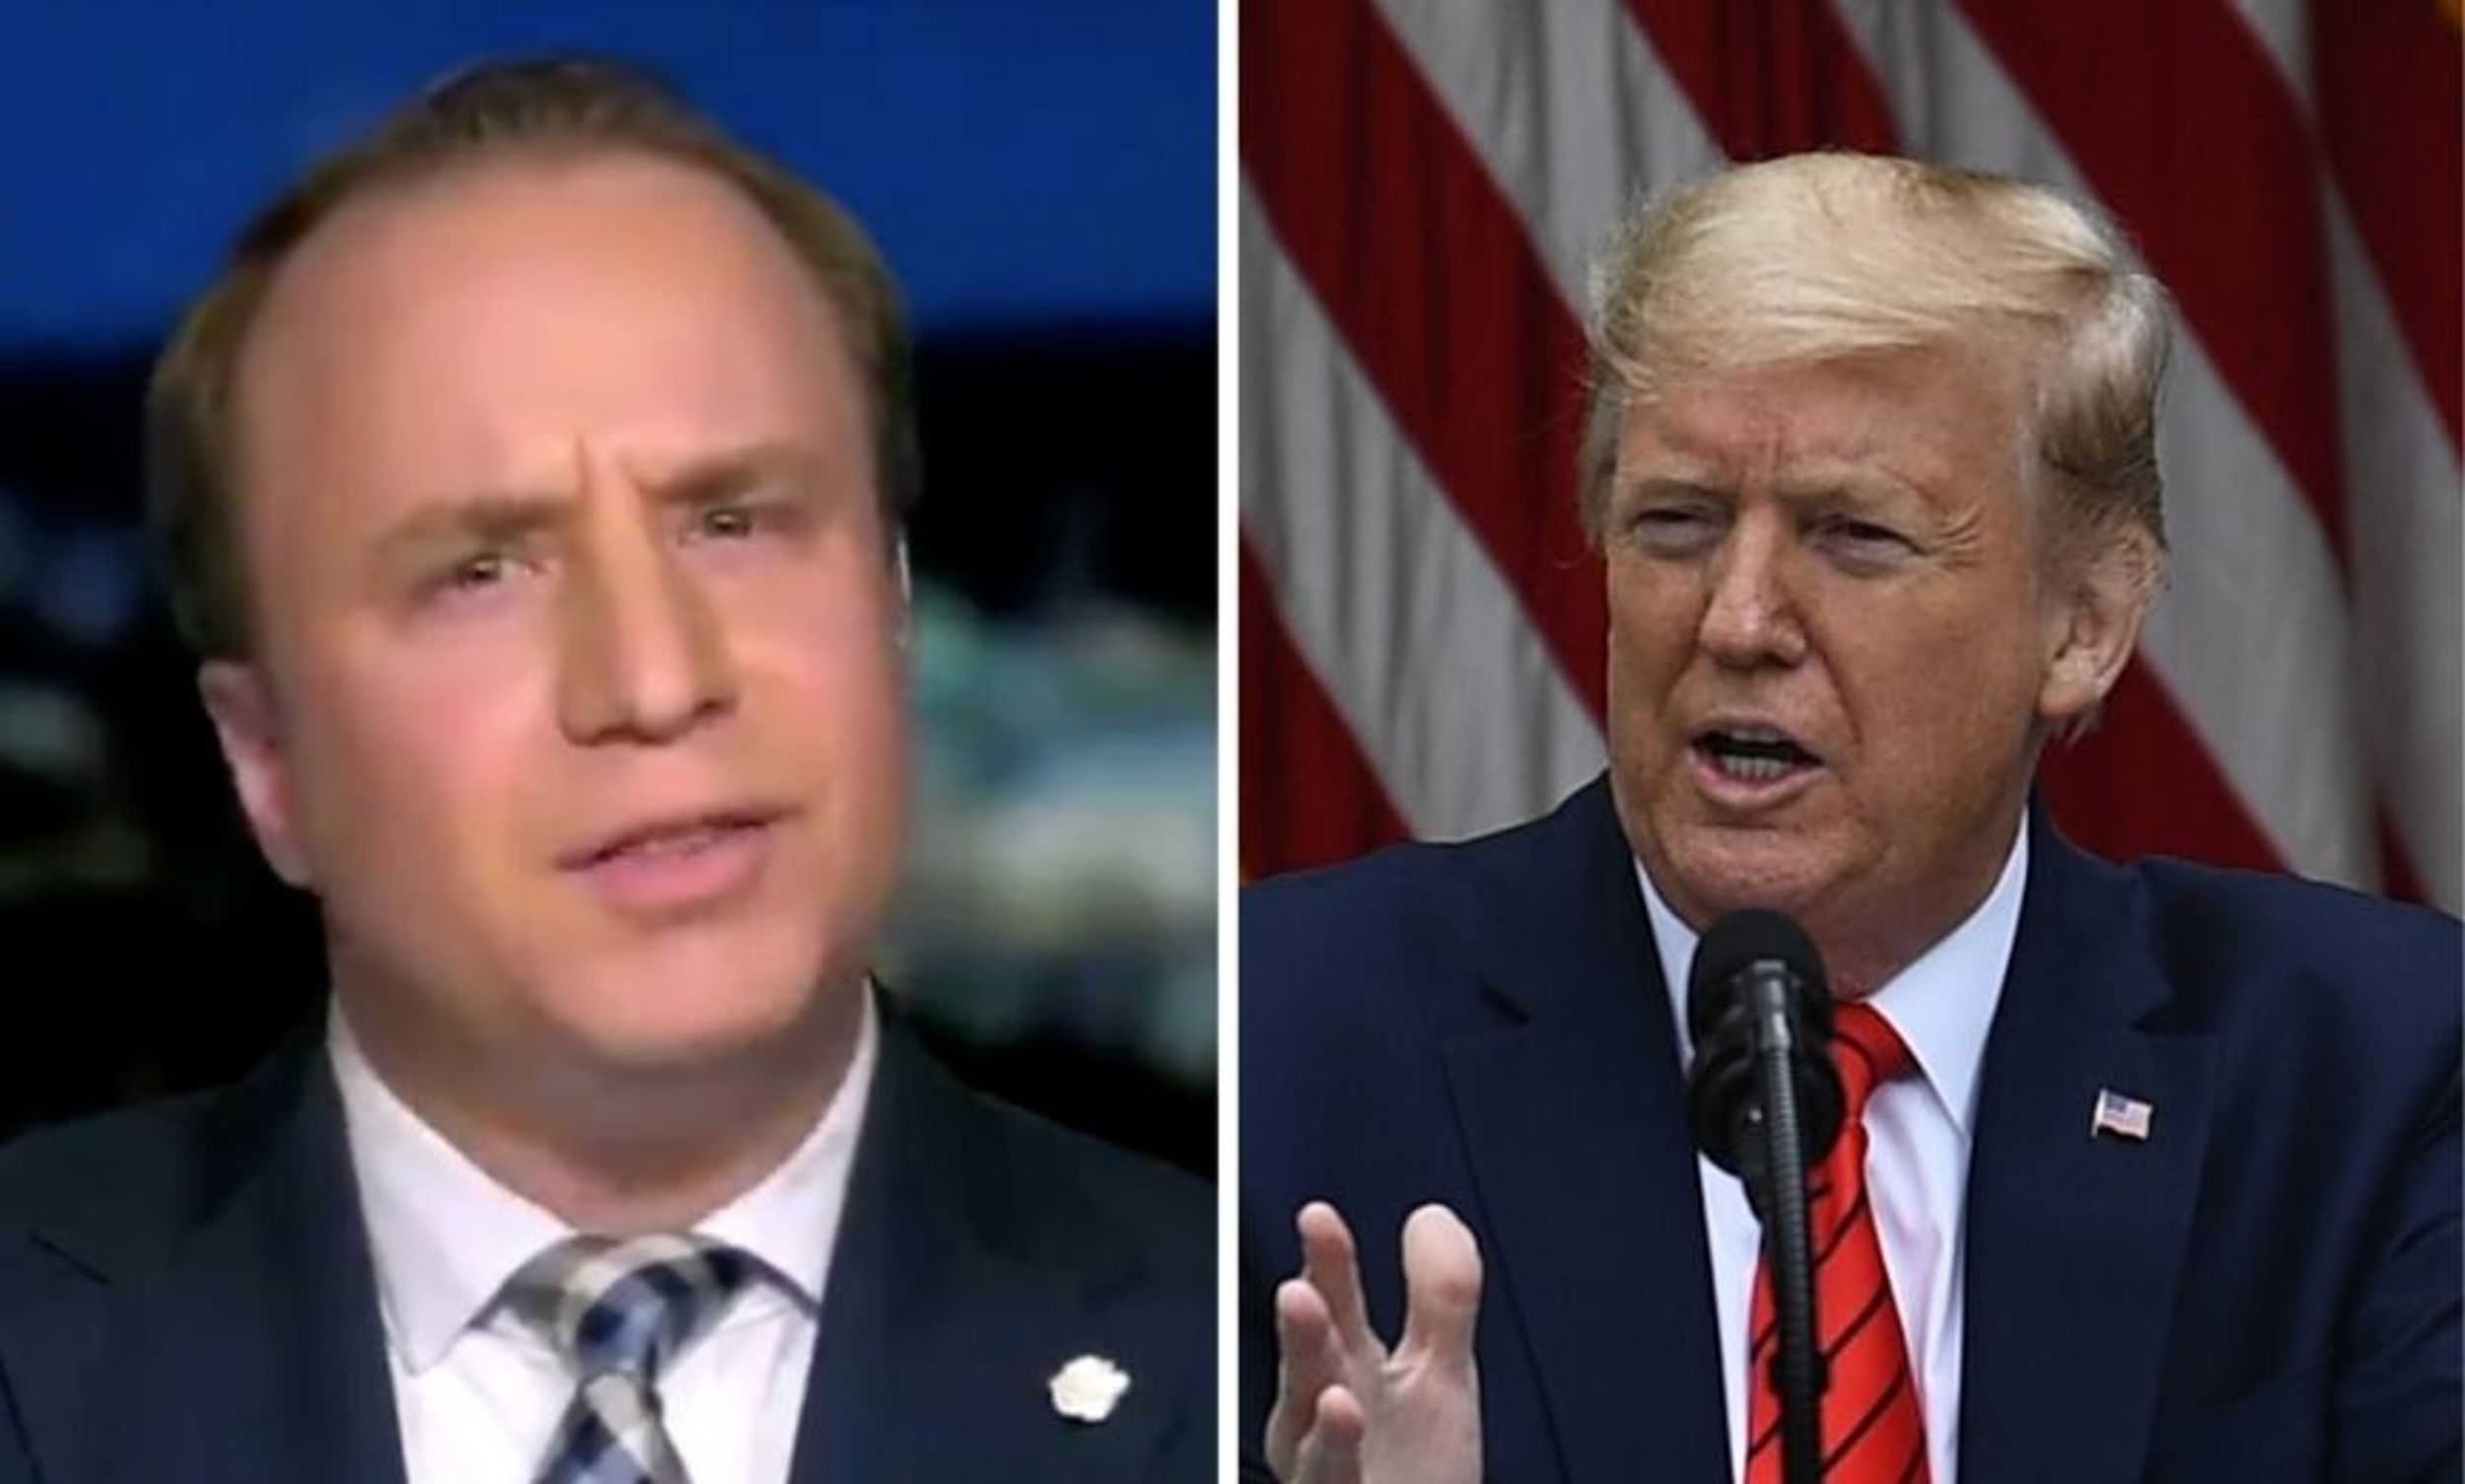 Fox News Guest Uses Trump's Own Impeachment Argument Against Him to Eviscerate Claim That Obama Committed a Crime